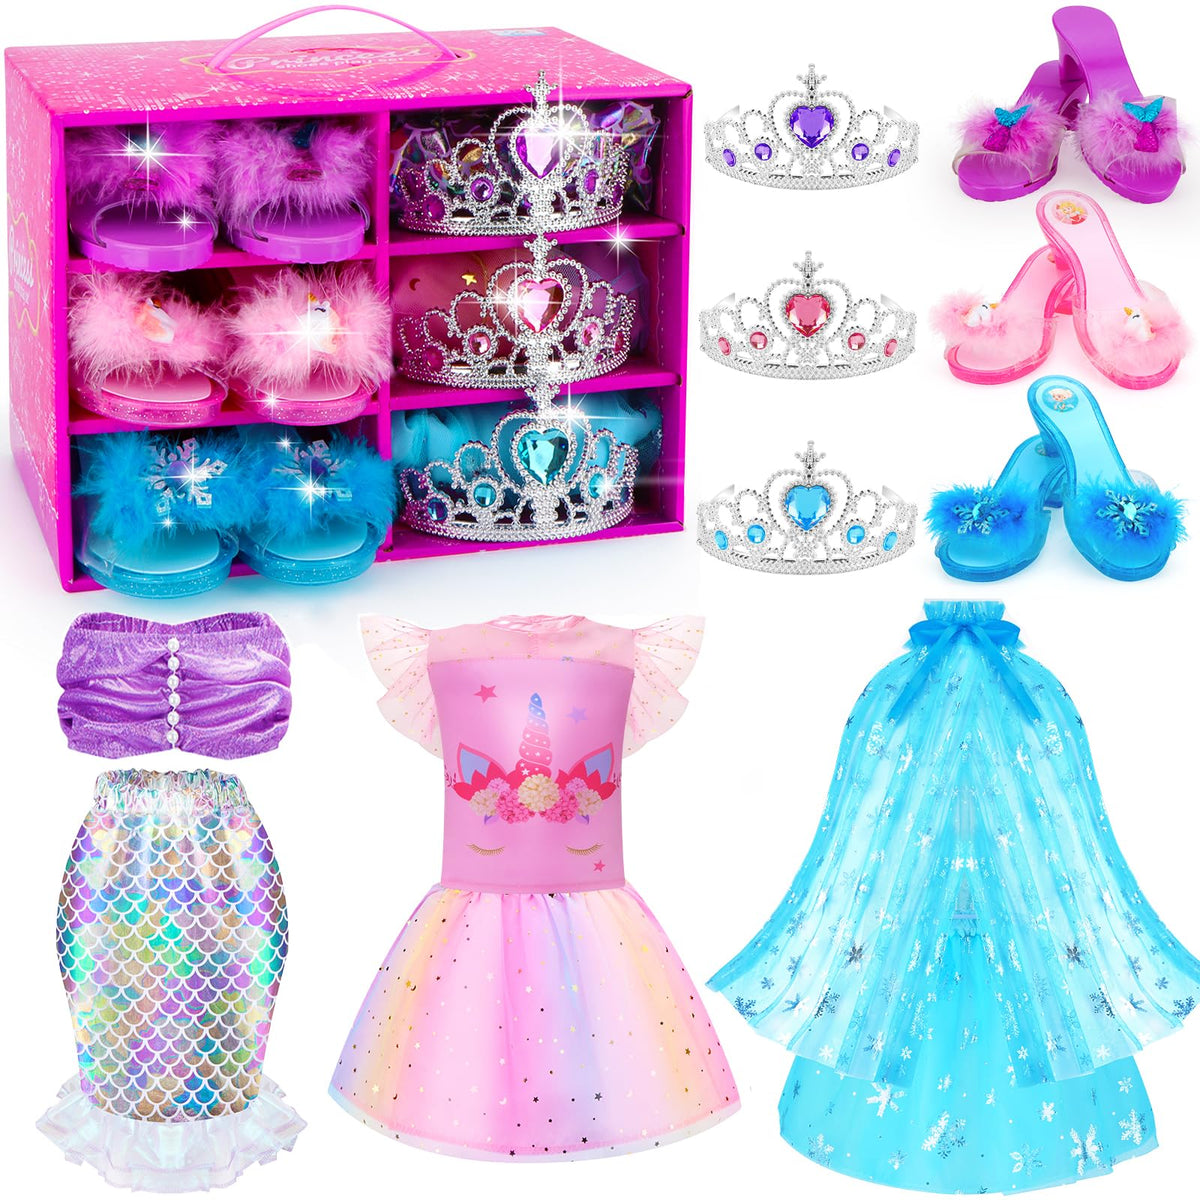 Princess Dress Up Shoes Set,Kids' Dress Up & Pretend Play Toy for Girls, Dresses,Tops,Jewelry, Shoes,Unicorn Mermaid Ice Princess Toys Gifts for Little Girls 3-6 Years Toddler Birthday Party